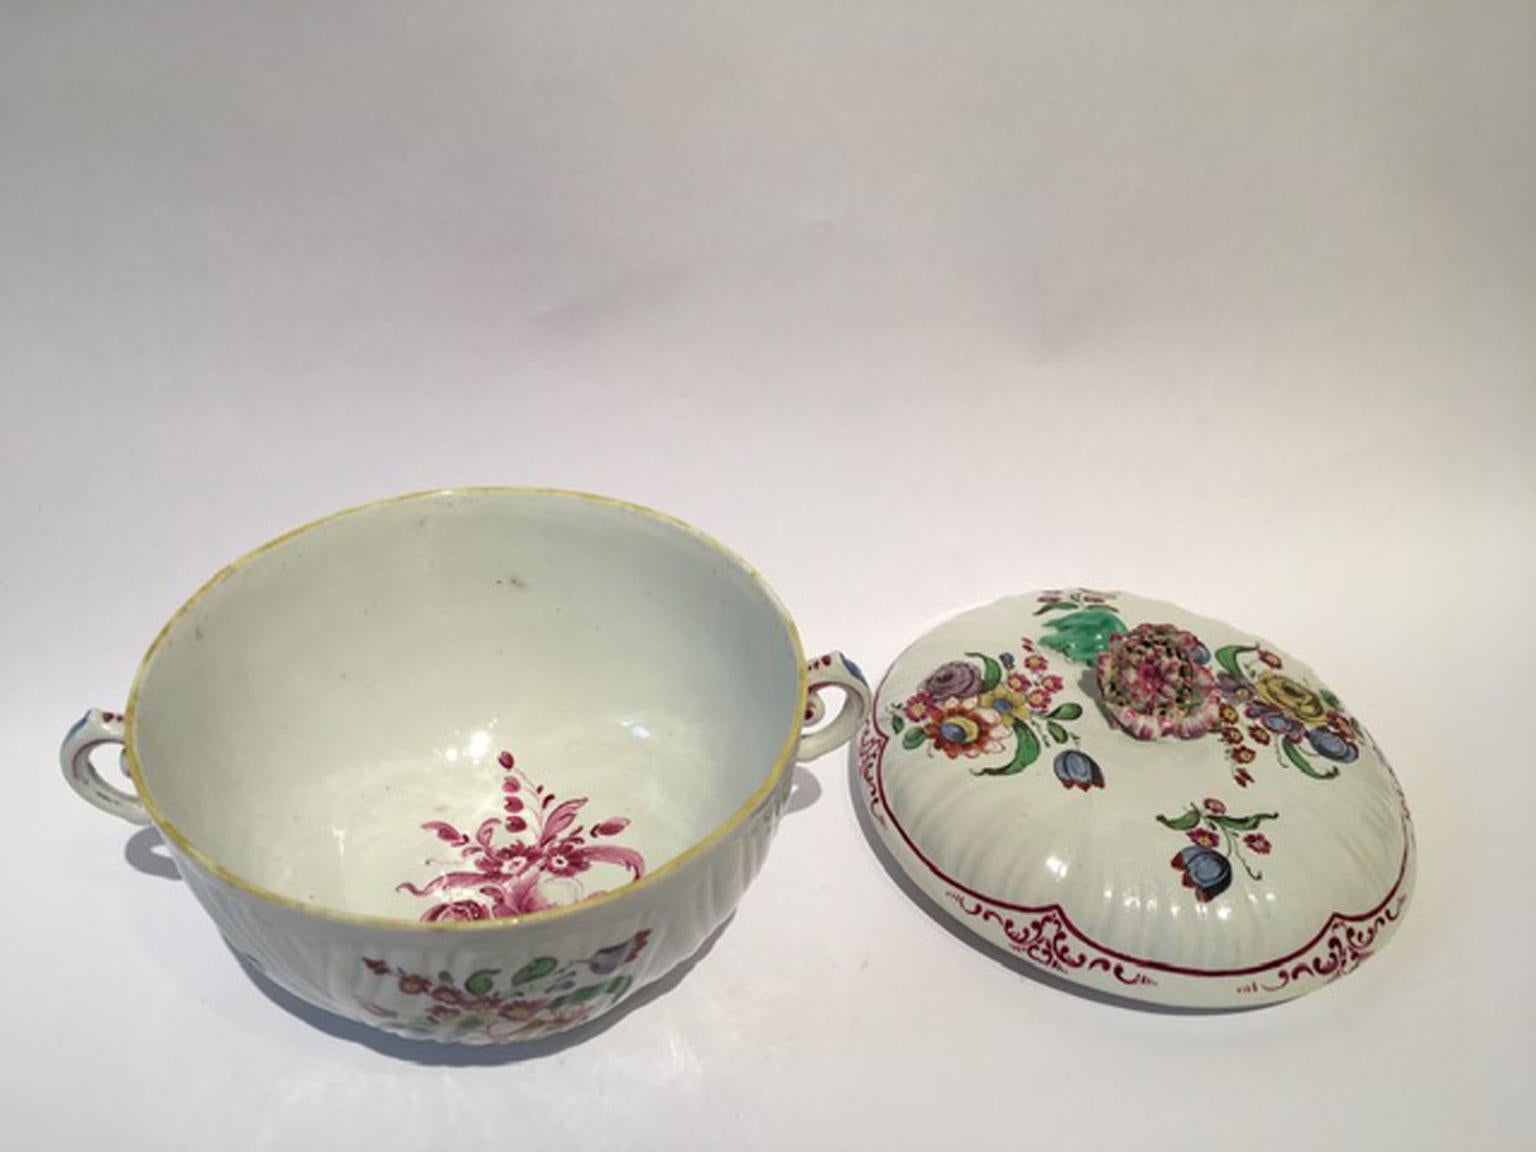 Italy 18th Century Richard Ginori Porcelain Covered Cup with Floral Drawings For Sale 6